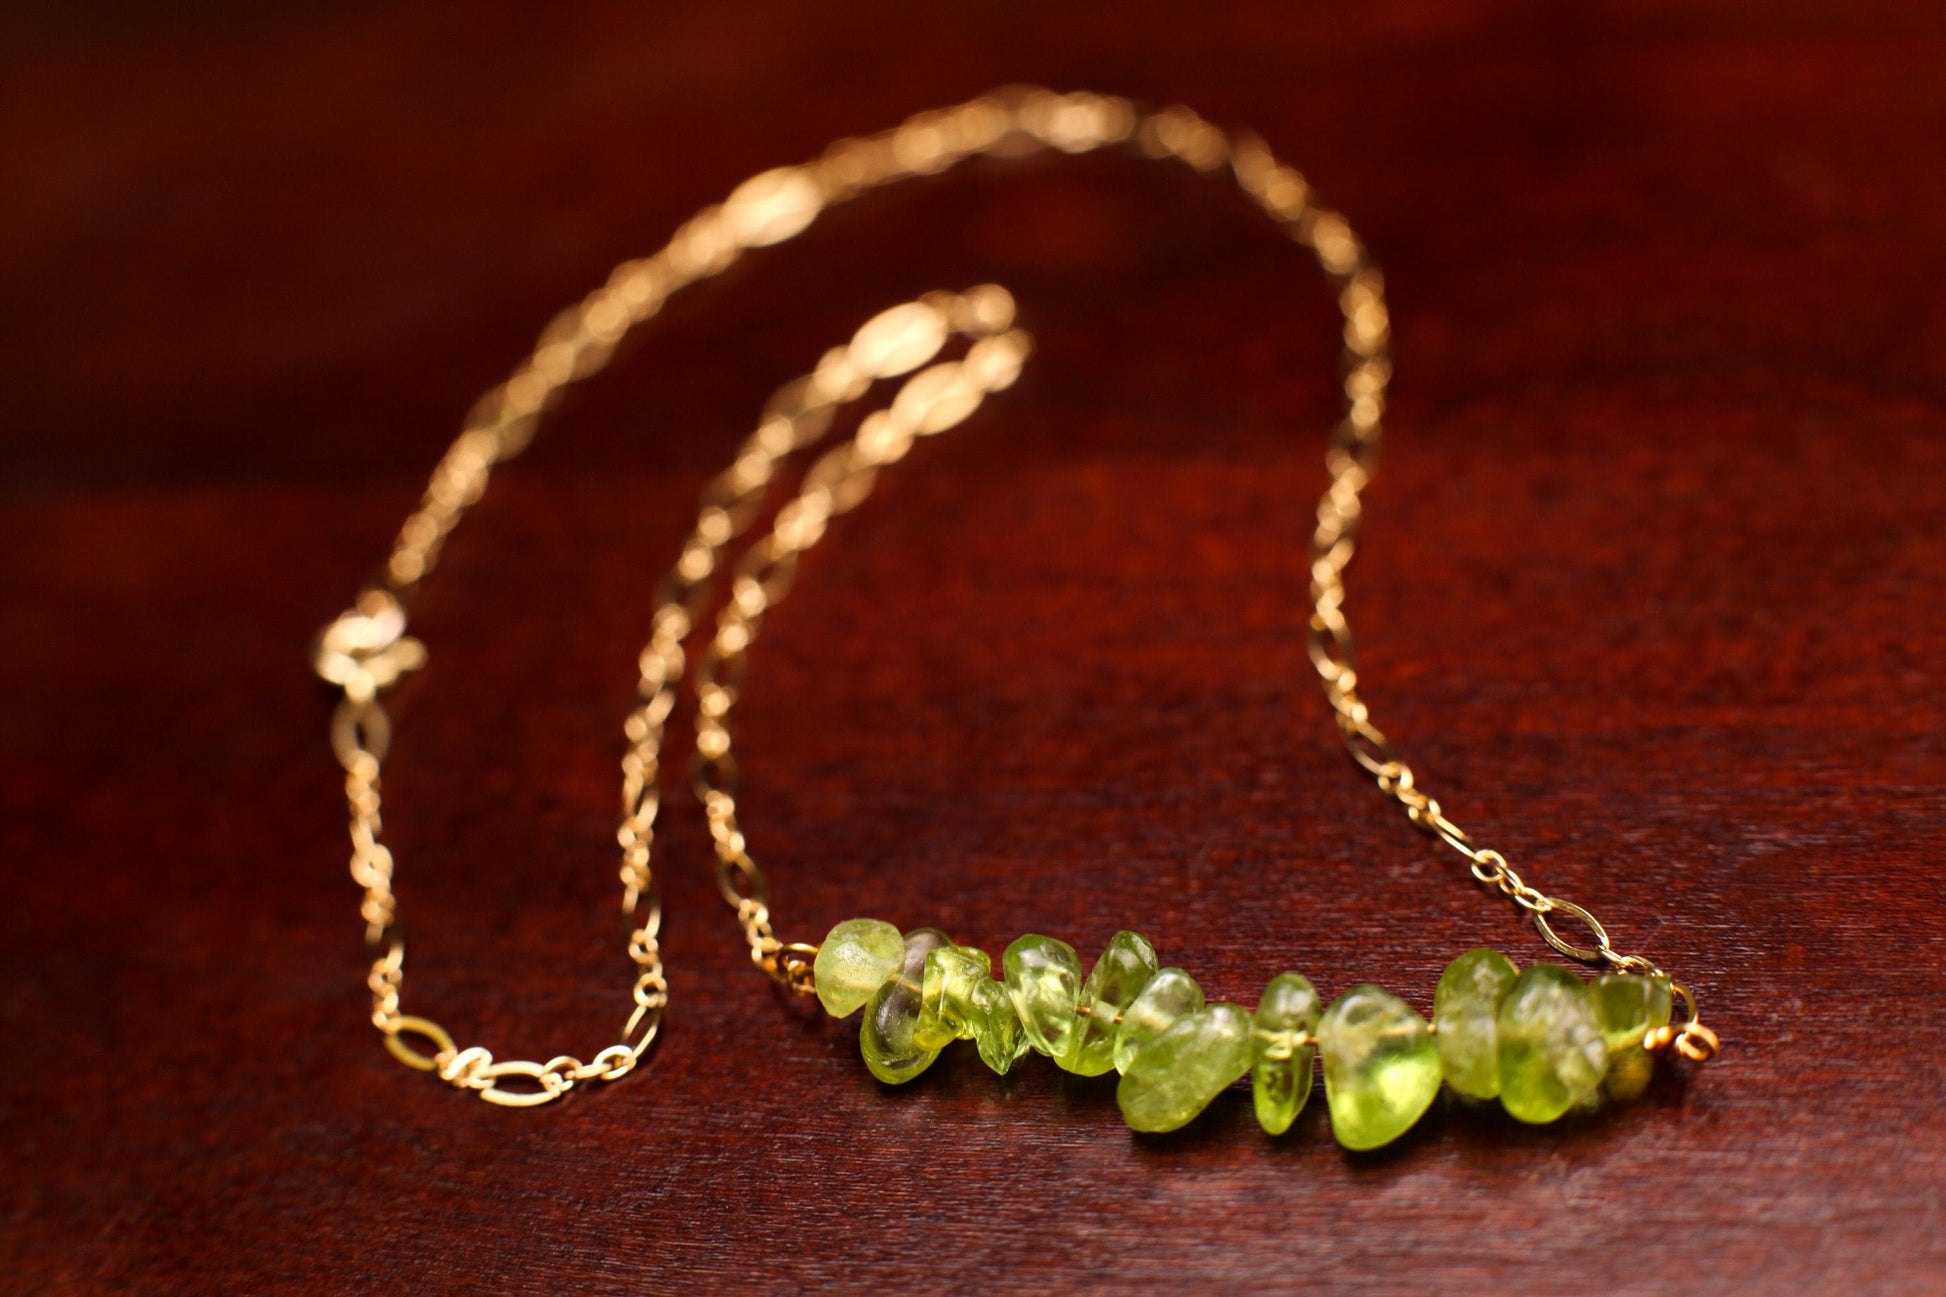 Natural Peridot 5-9mm Freeform Nugget, 14K Gold Filled, 925 Sterling Silver Bar Necklace, Healing Crystal, Chakra, August Birthstone